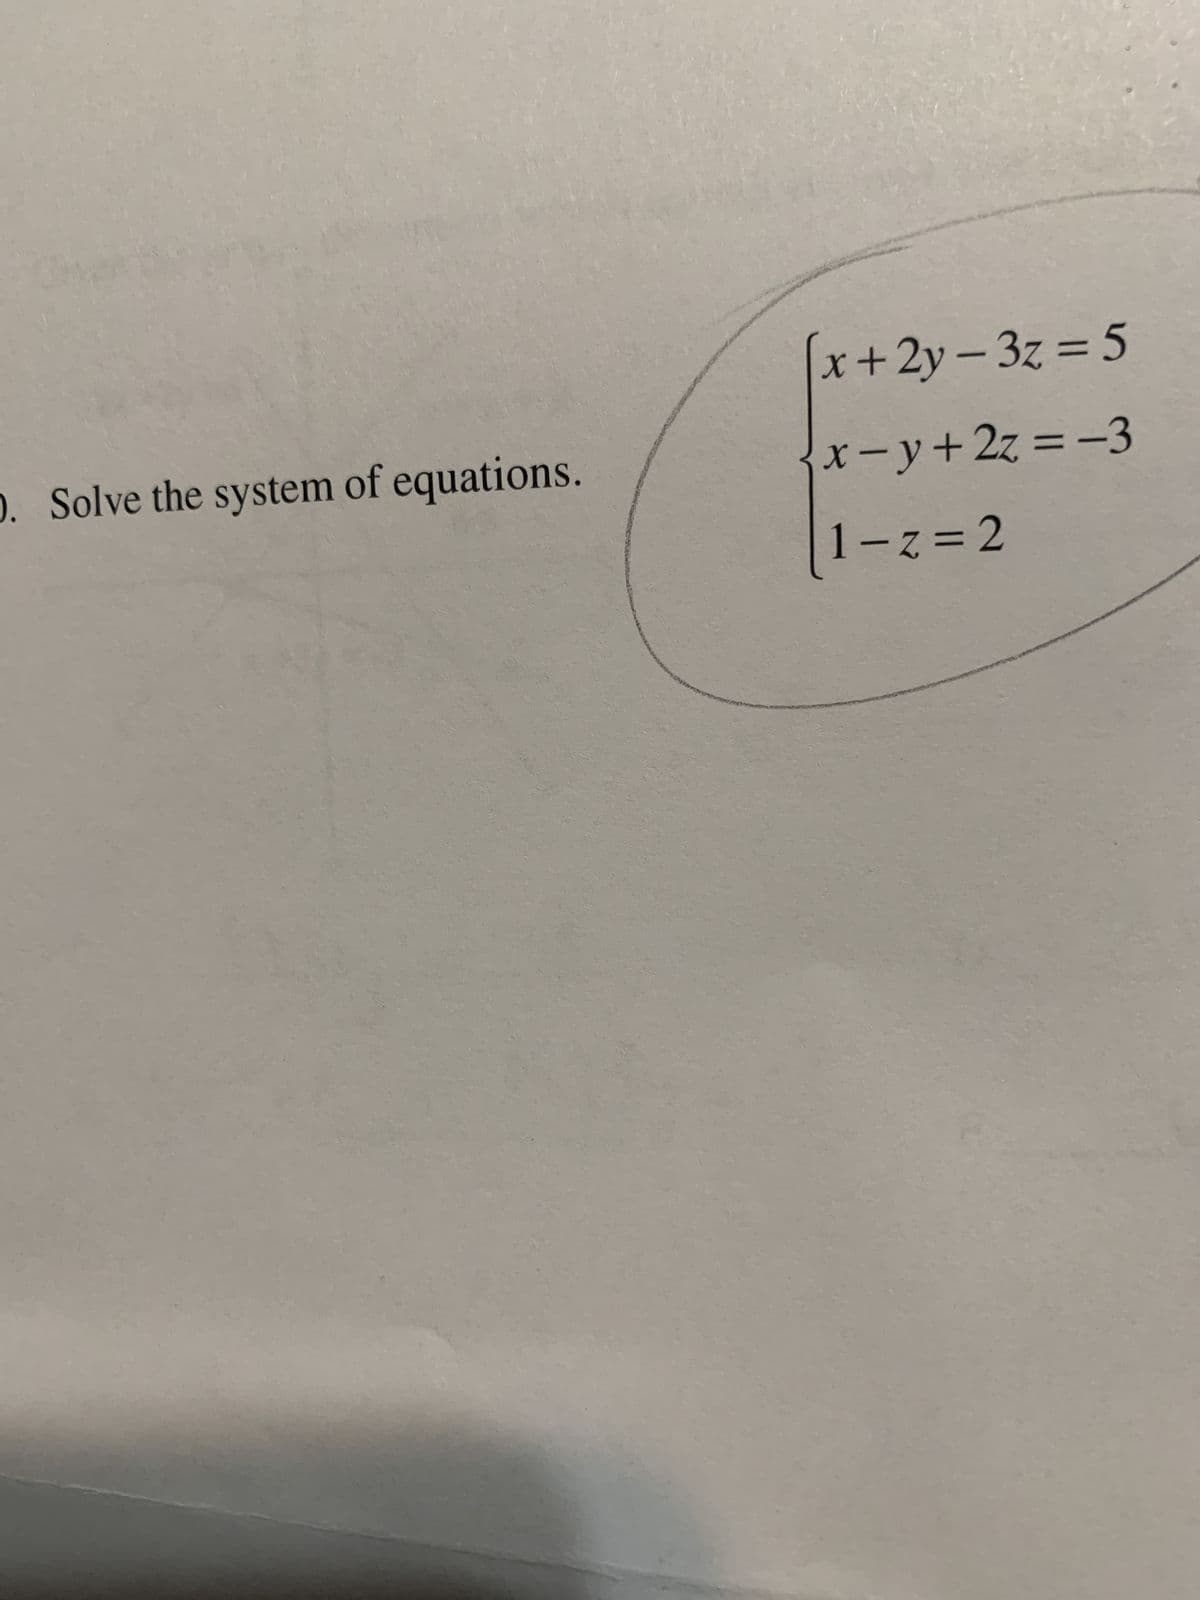 D. Solve the system of equations.
x+2y-3z = 5
x-y+2z = -3
1-z=2